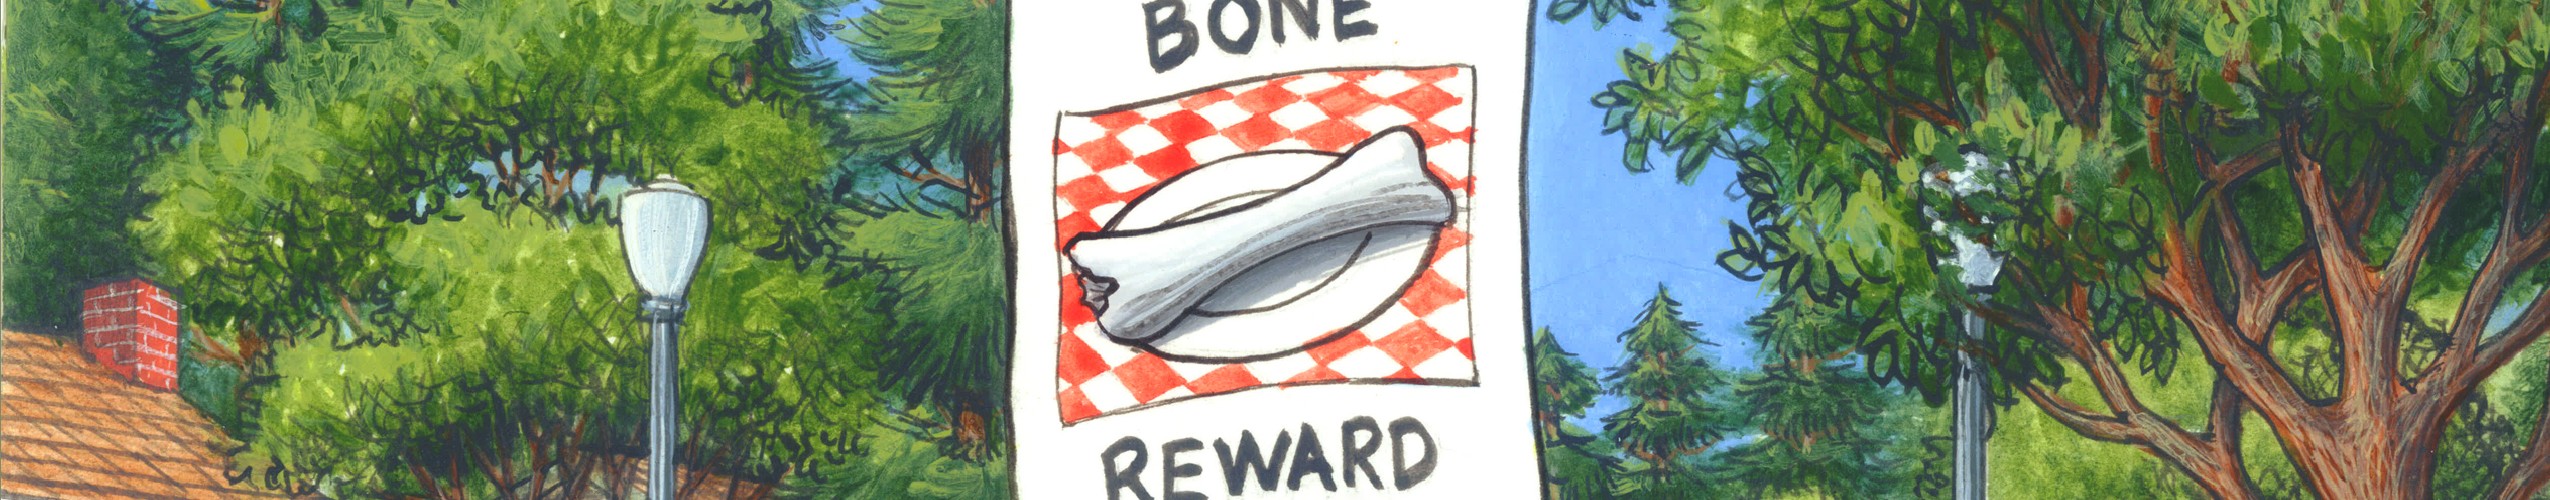 The Case of the Missing Bone